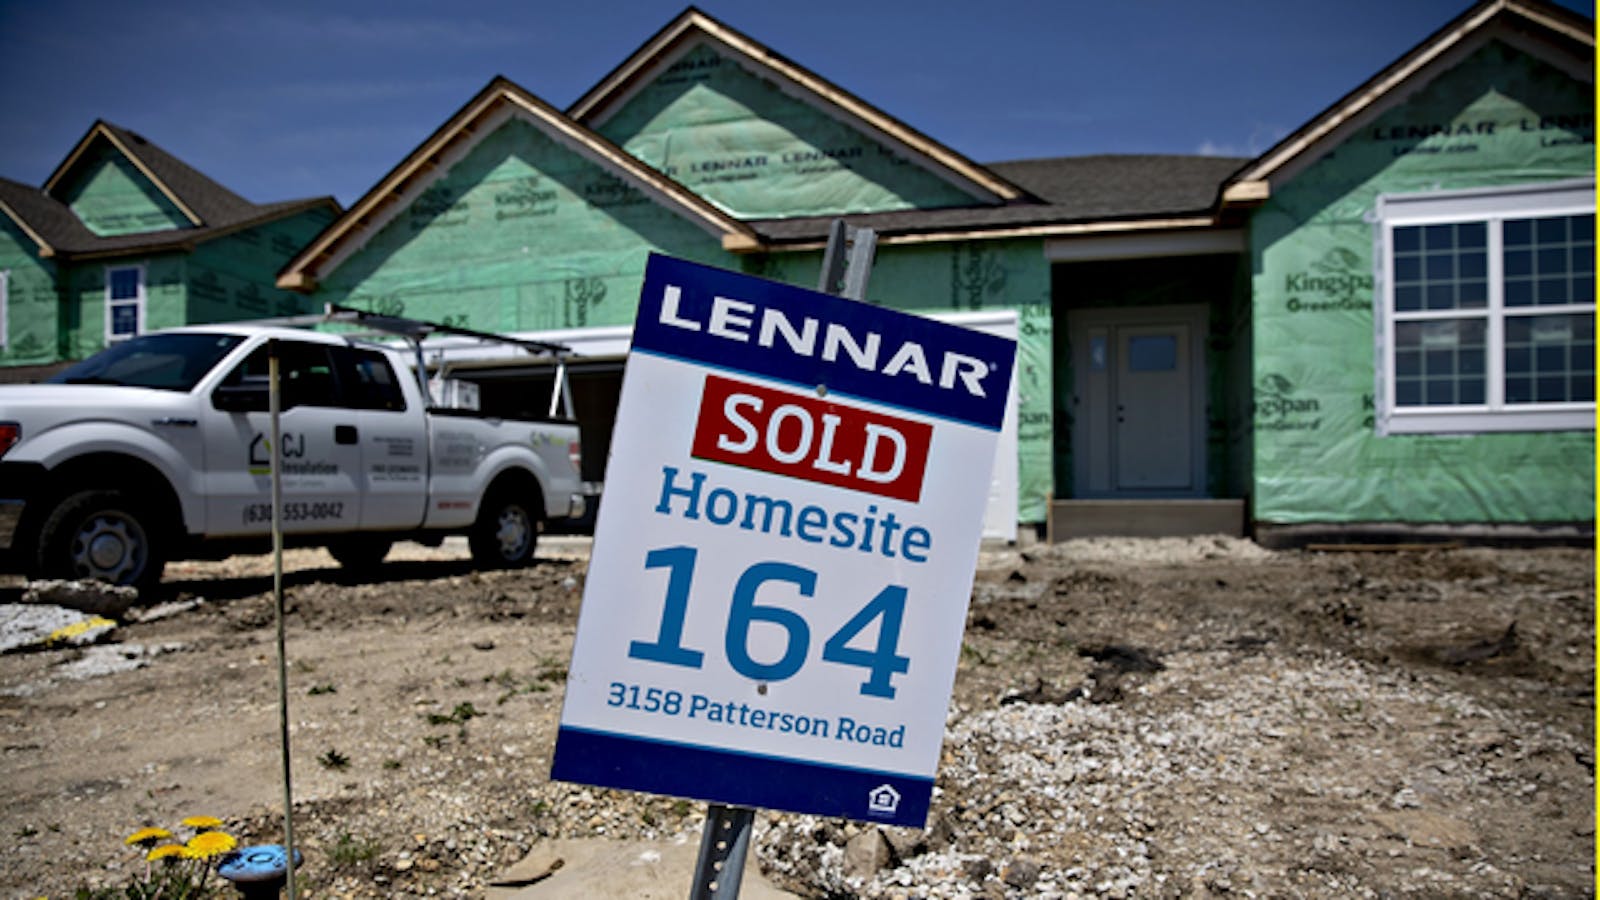 A ‘Sold’ sign is displayed outside a home under construction at a Lennar development site. Photo by Bloomberg